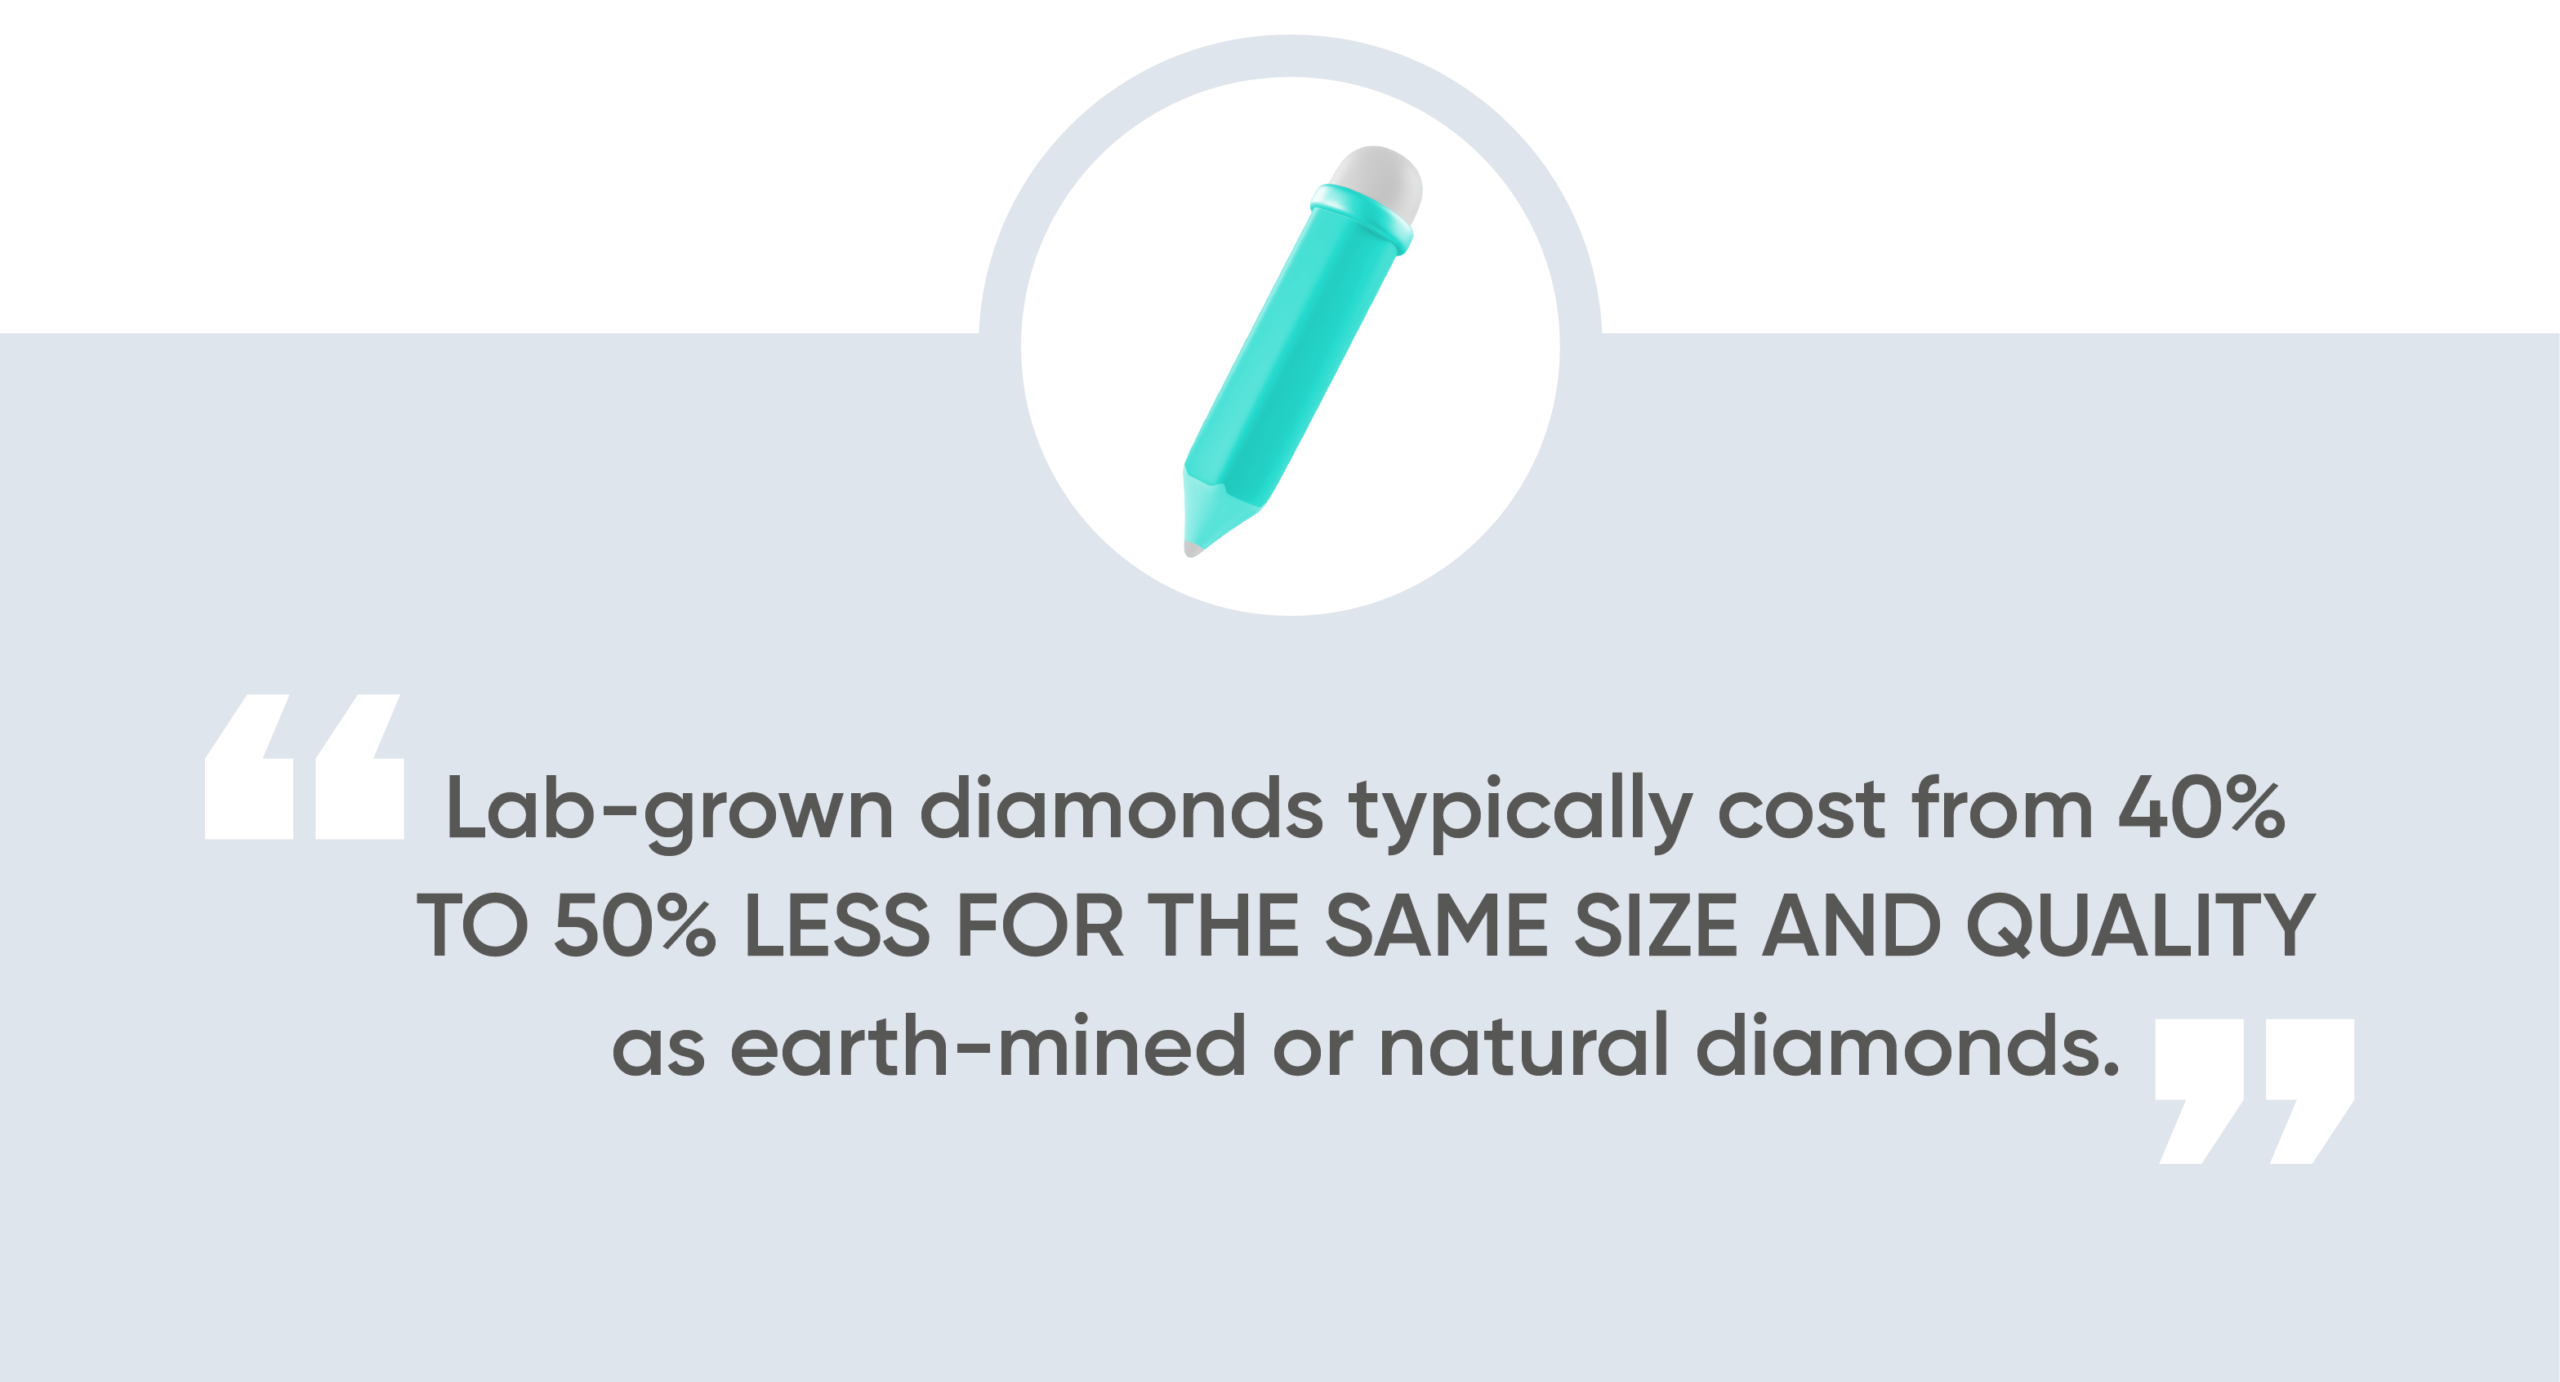 lab-grown diamonds typically cost from 40% to 50% less for the same size and quality as earth-mined or natural diamonds. 